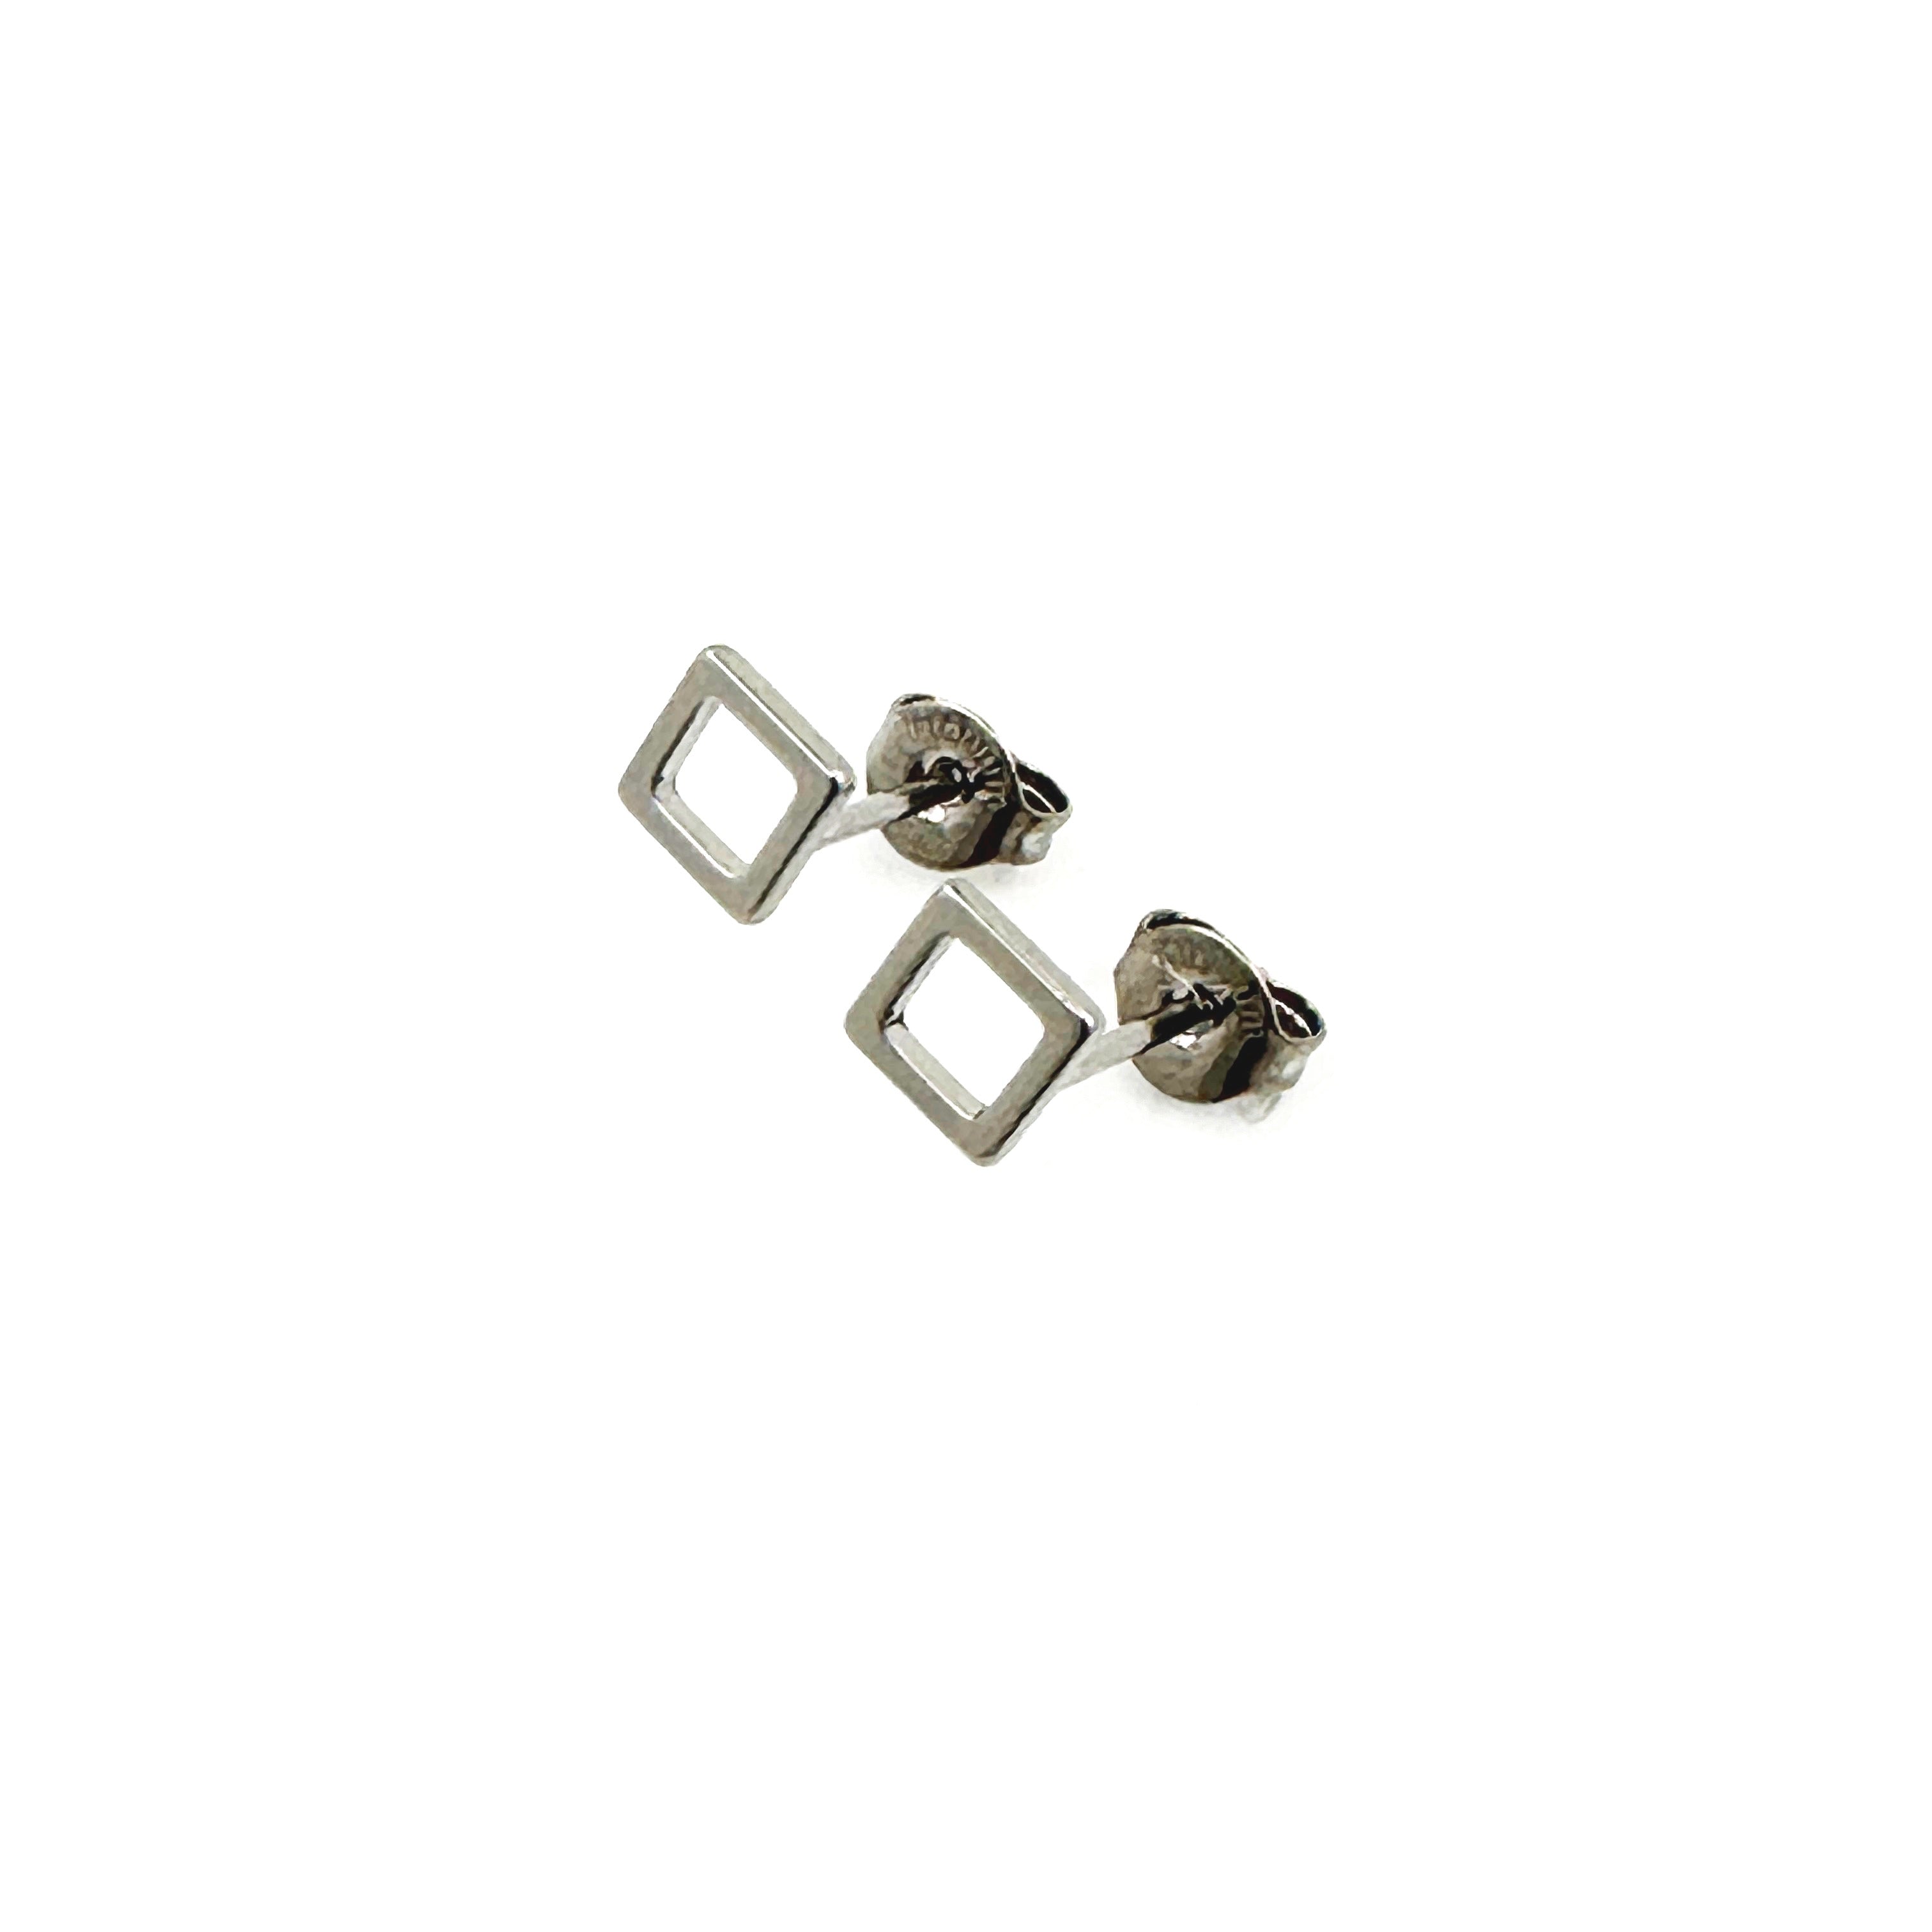 Square Hollow ear studs | Truly Hypoallergenic, Titanium Earrings